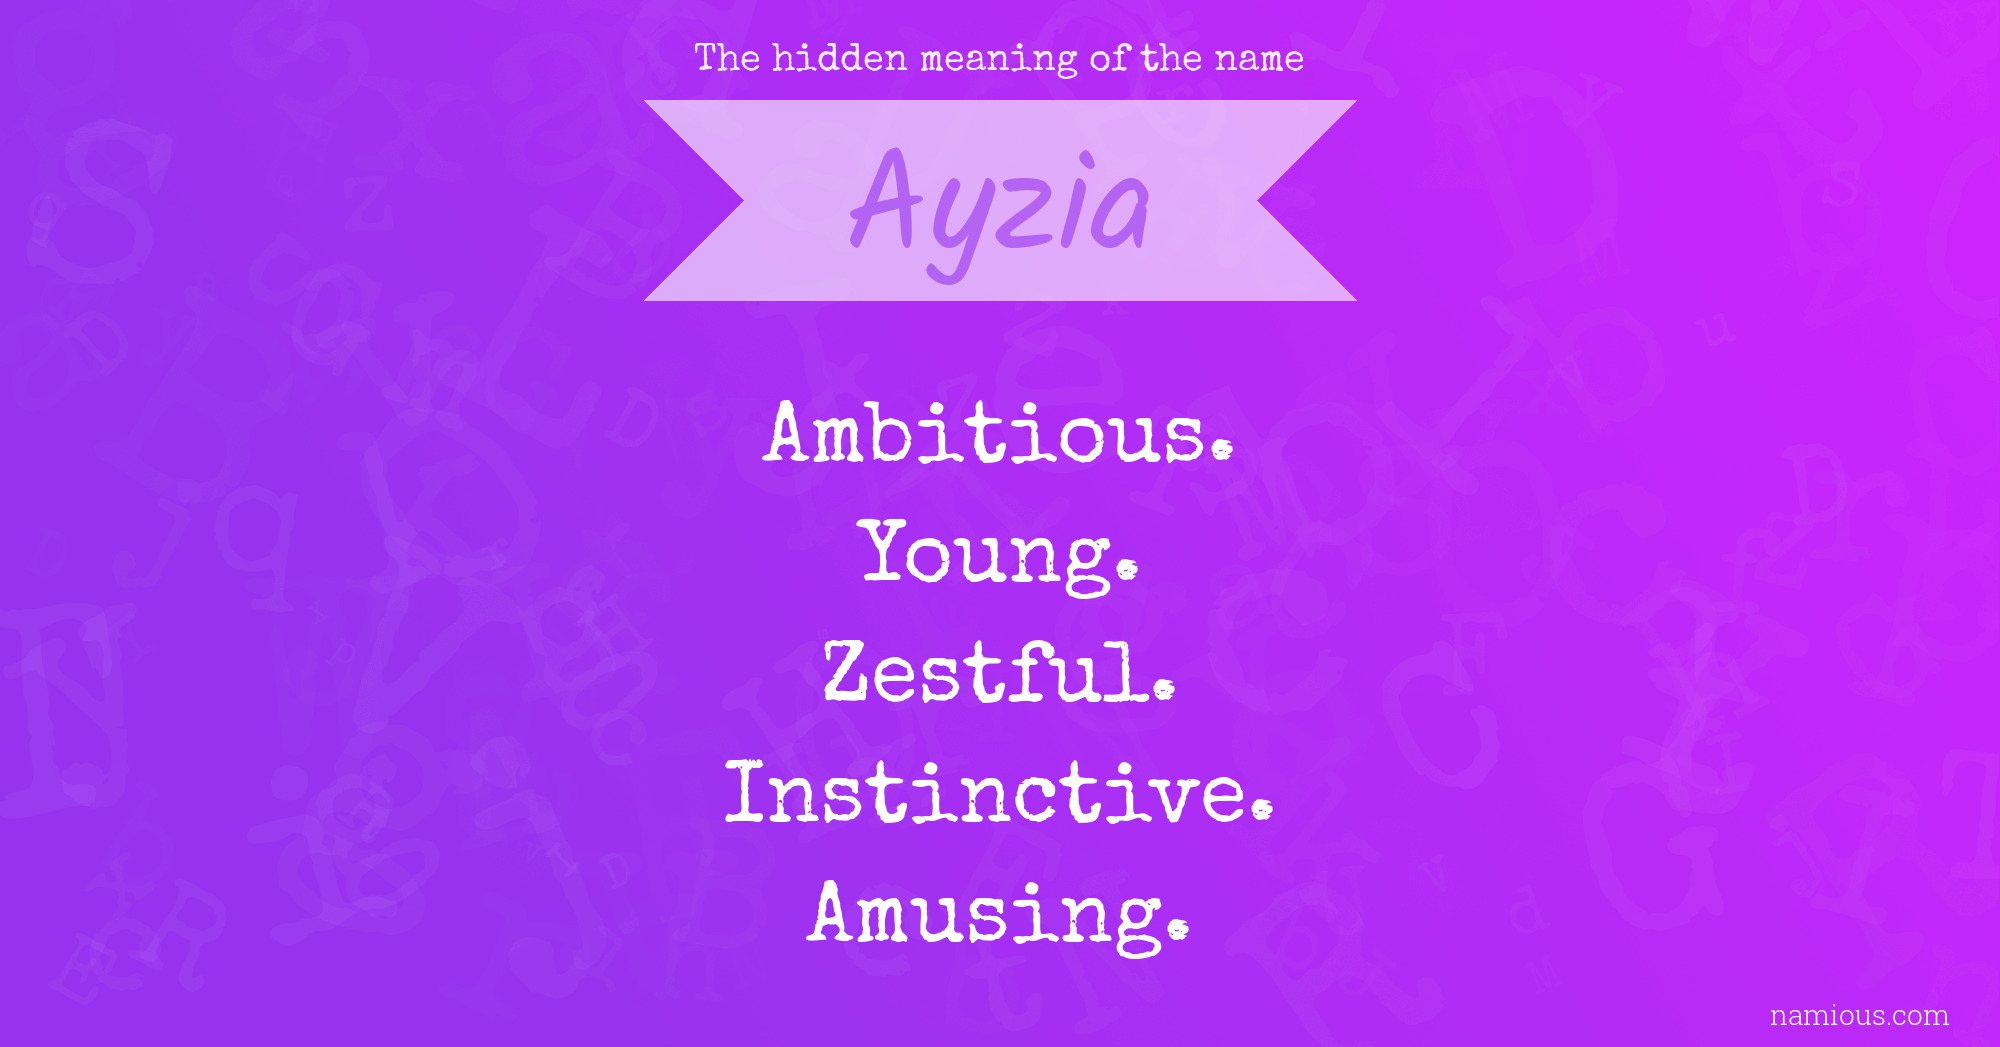 The hidden meaning of the name Ayzia